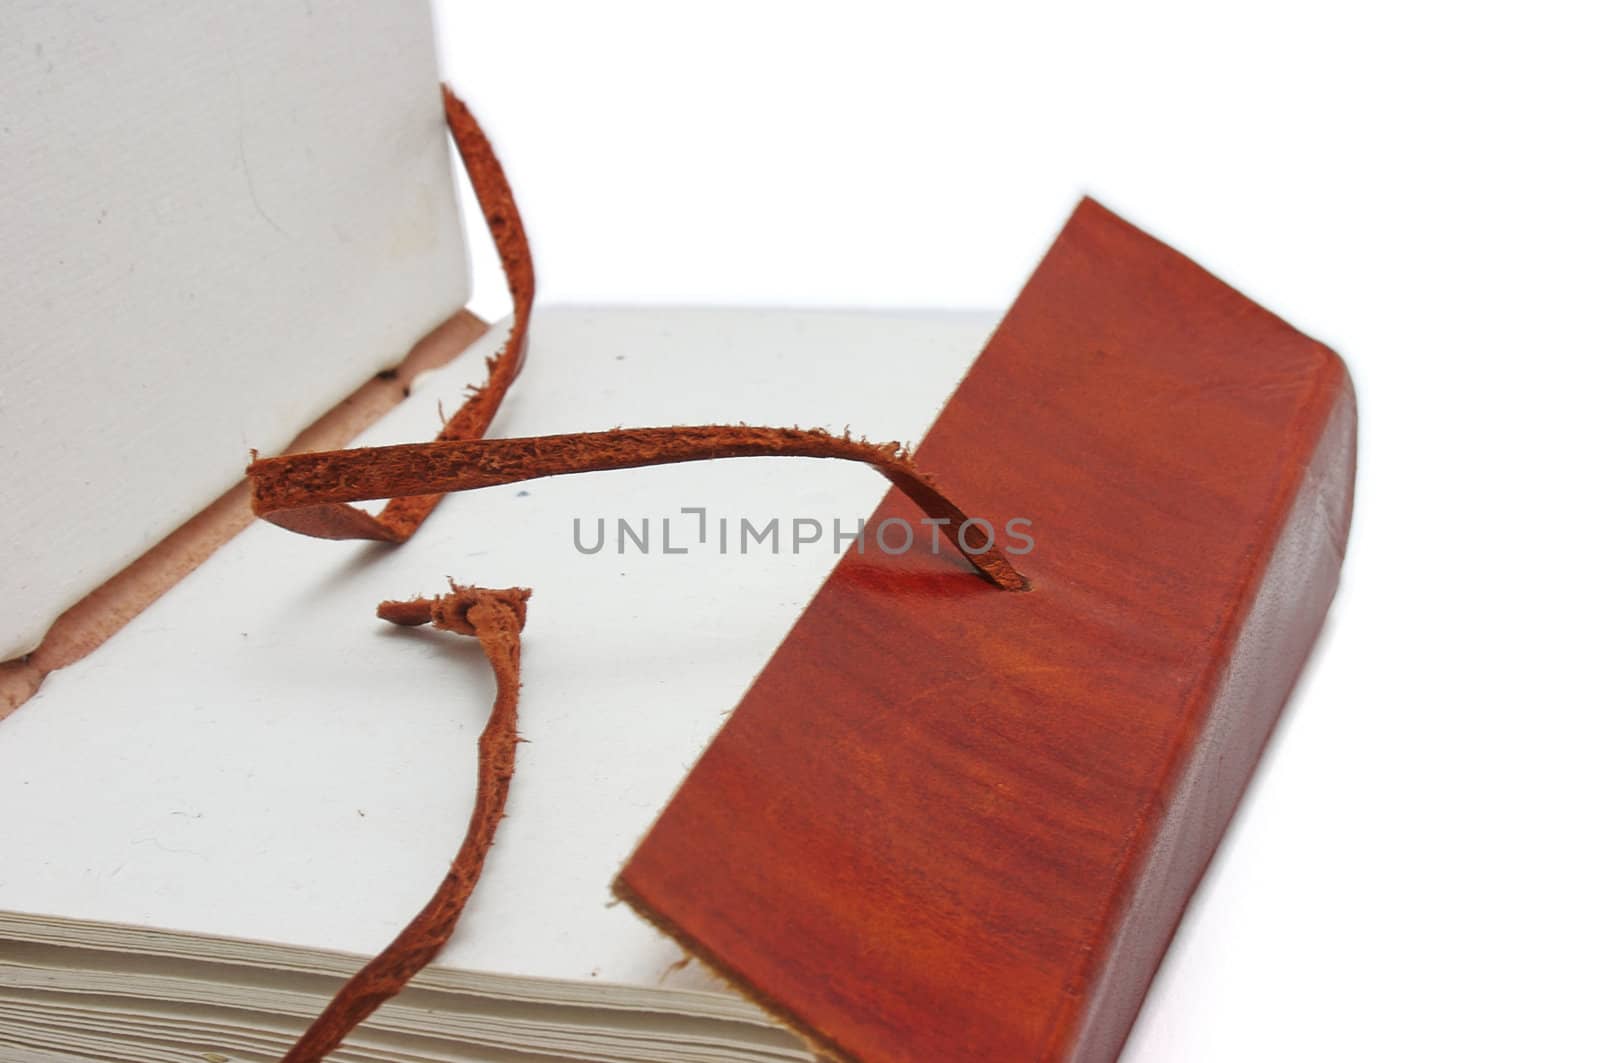 Old leather-bound book with parchment paper inside on a white background